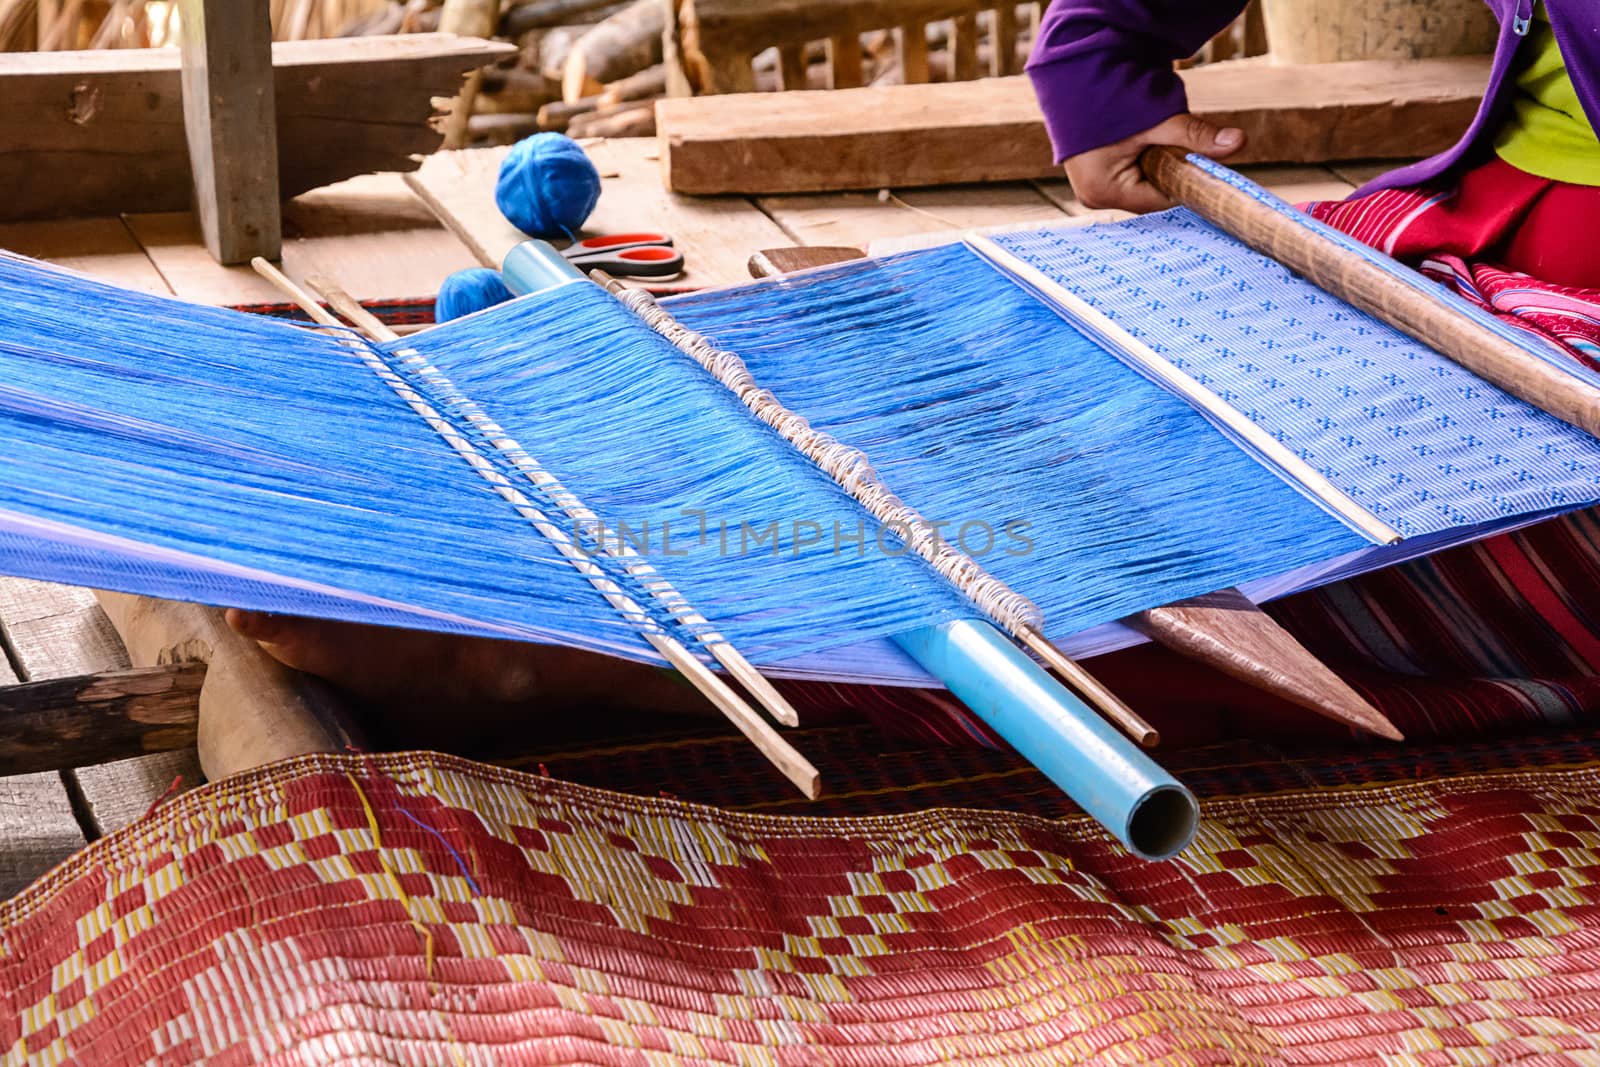 Fabric weaving tools by NuwatPhoto